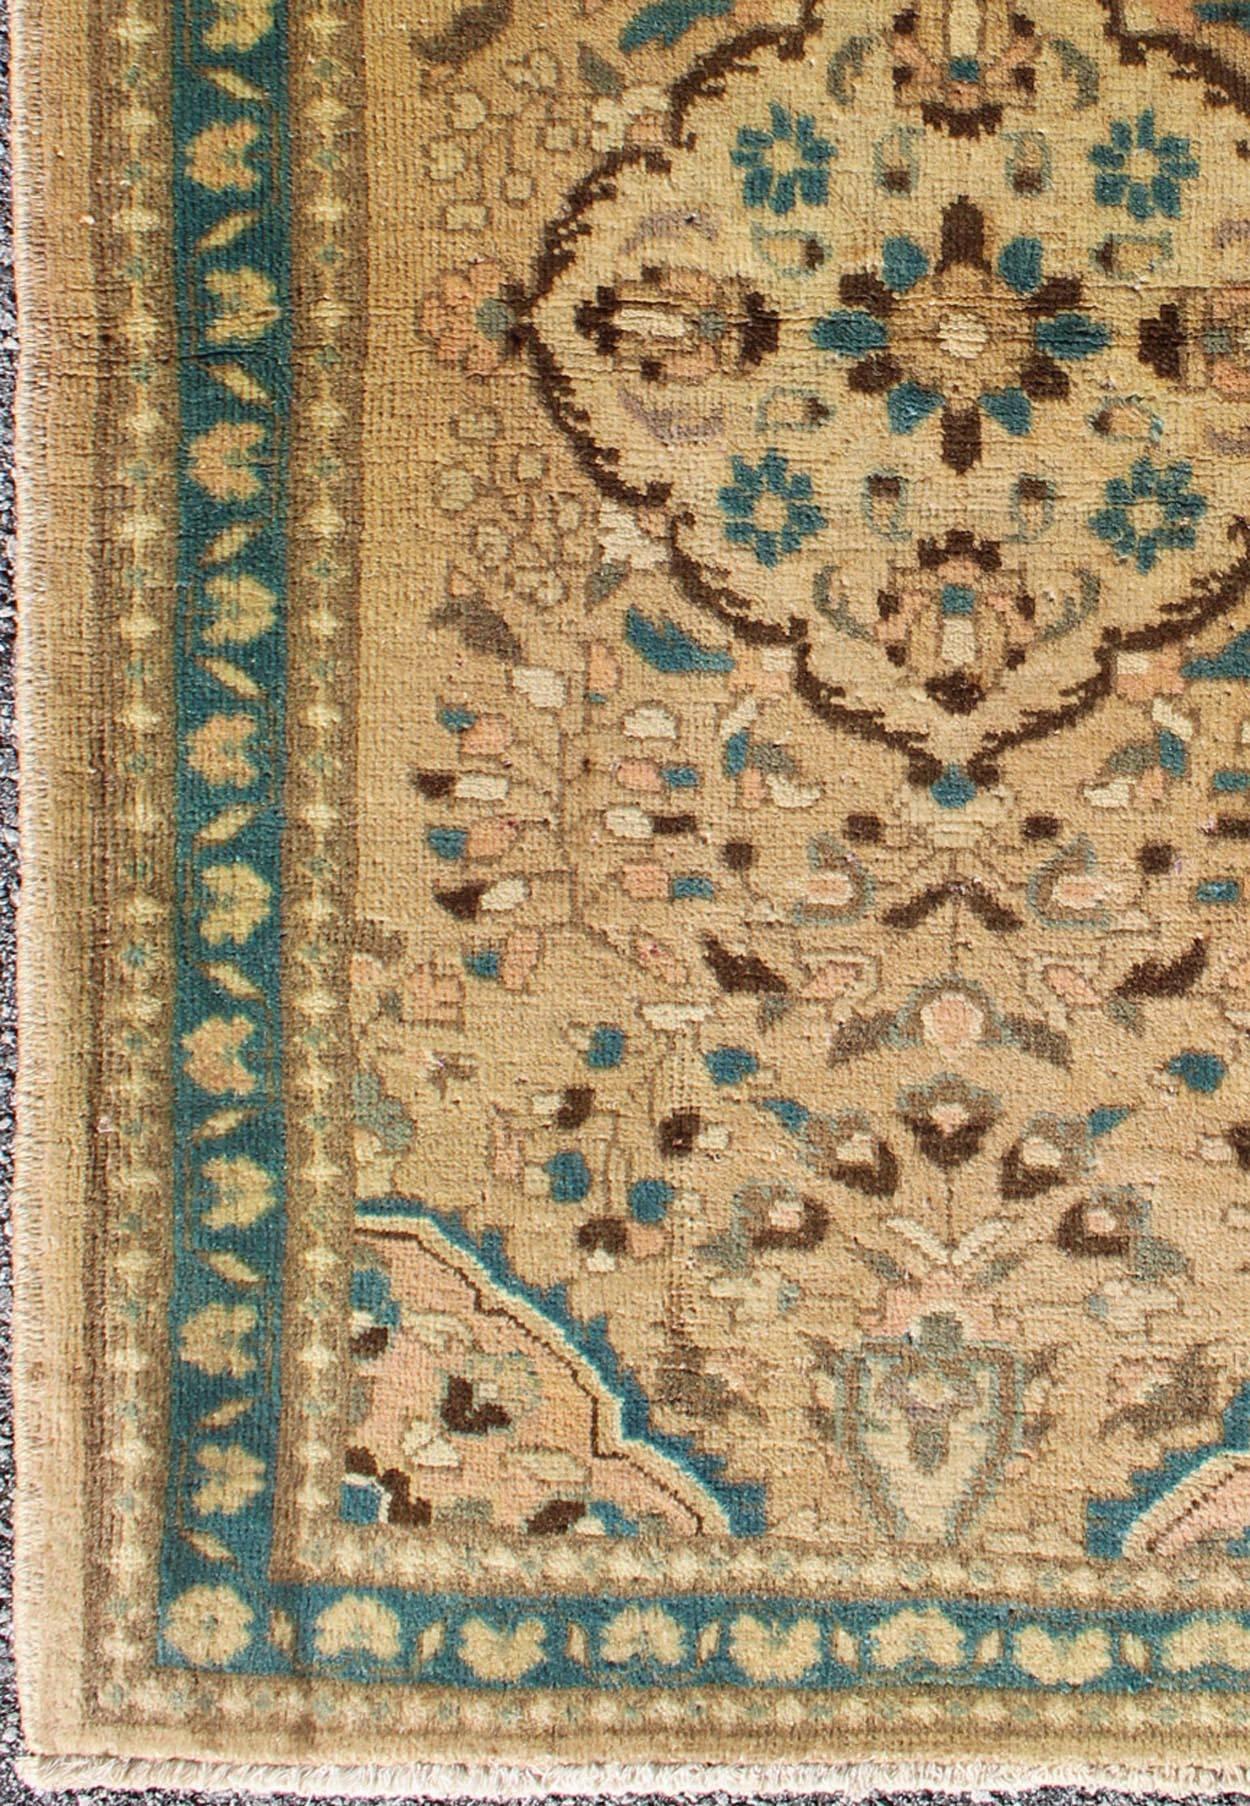 Floral Medallion midcentury Persian Lilihan rug in tan, taupe, and turquoise, rug h-102-35, country of origin / type: Iran / Lilihan, circa 1950

This spectacular midcentury Persian Lilihan (circa 1950) bears a magnificent splendor indicative of